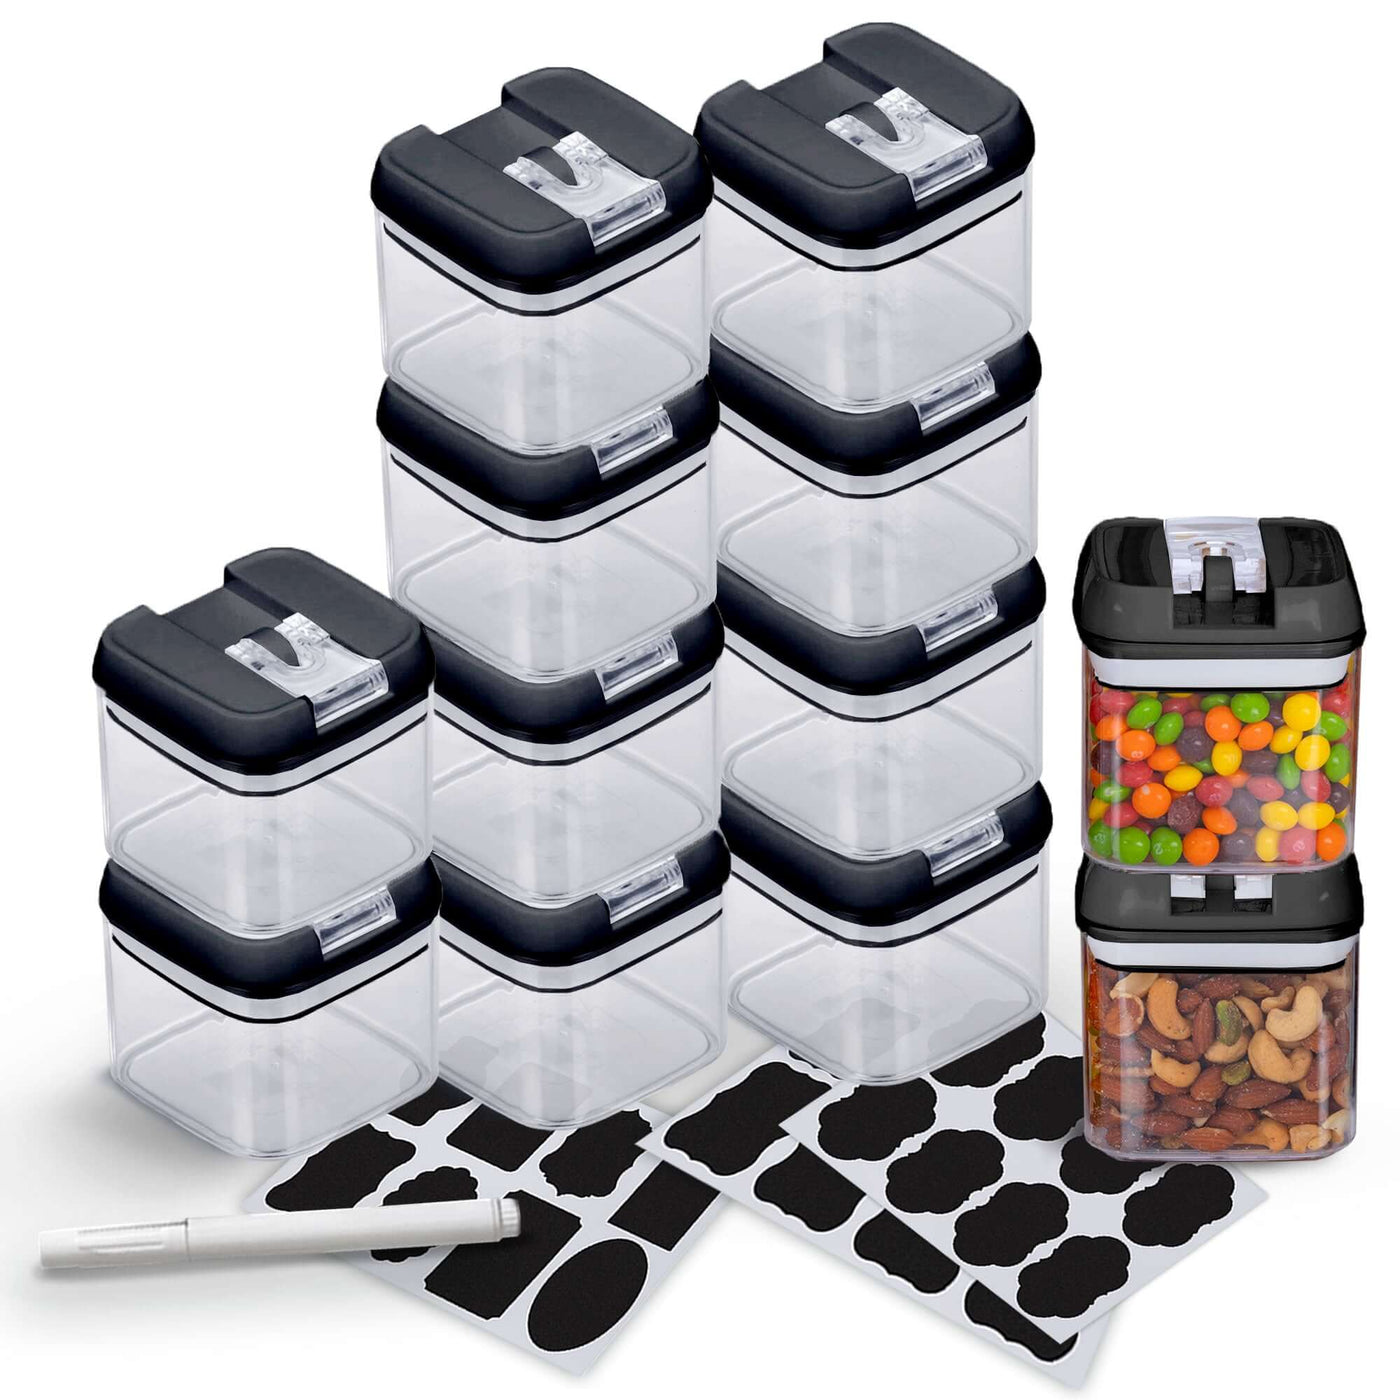 Cheer Collection Set of 12 One Size Airtight Food Storage Containers (Black)